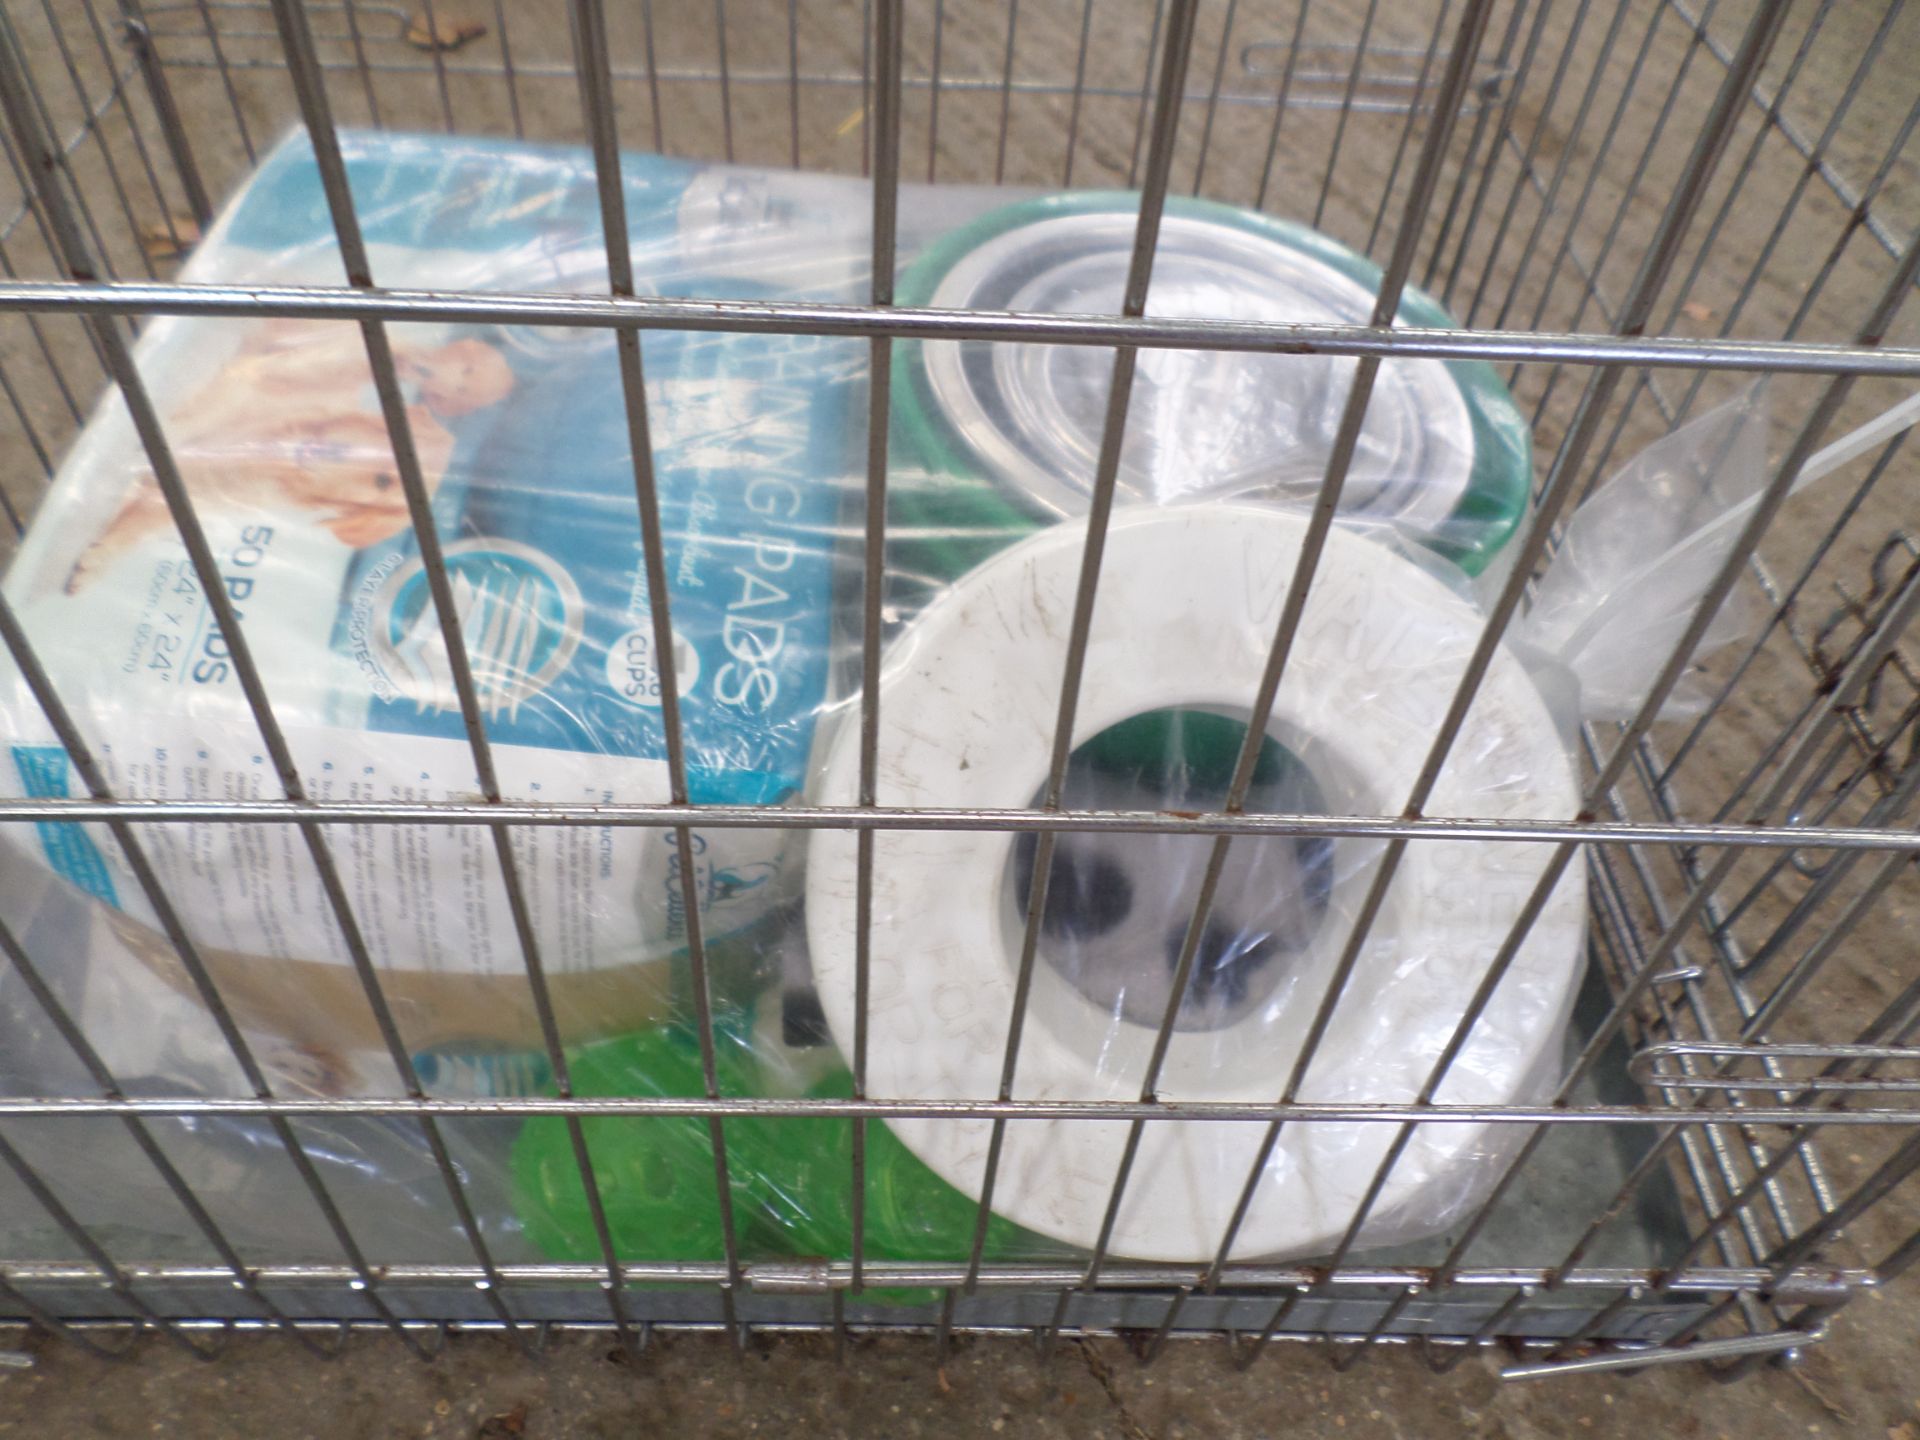 Small dog cage 50cmx60cmx60cm with pack of puppy training pads, travel bowls, food bowls, toys and - Image 2 of 2